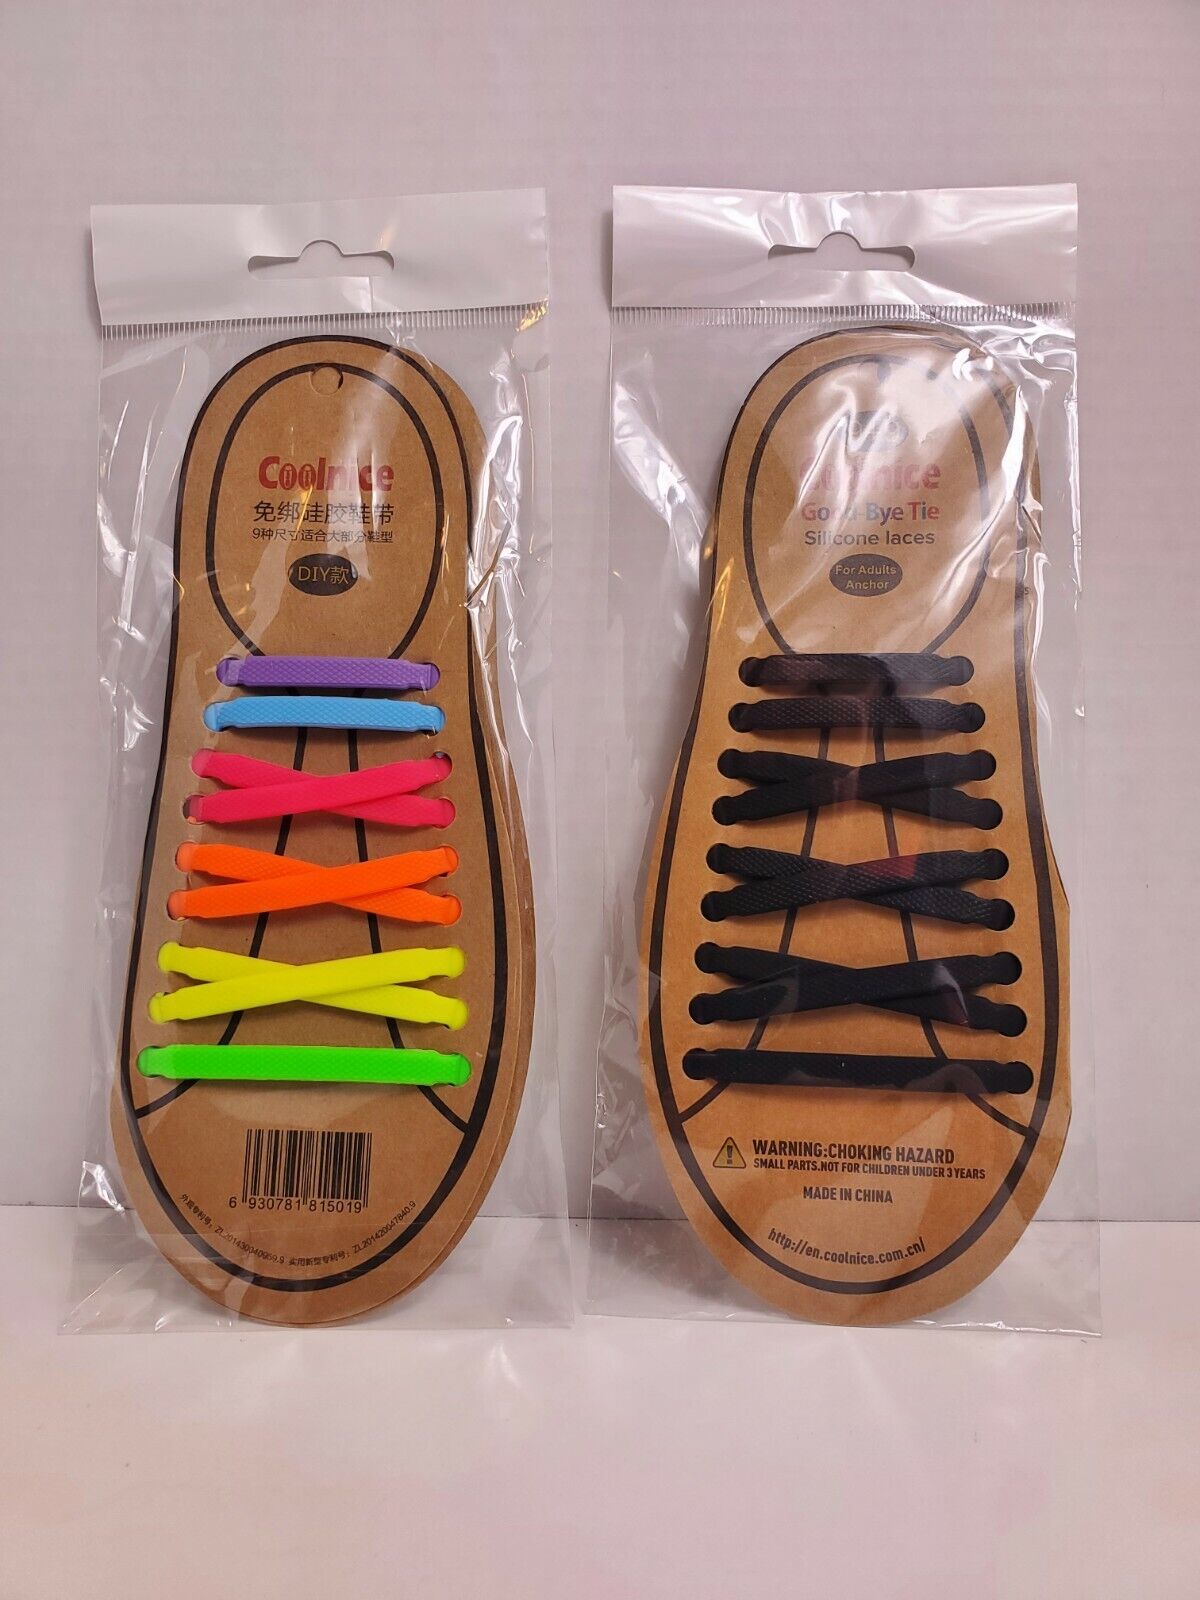 Coolnice No Tie Shoelaces 2 Pack - One Set Black & One Set Rainbow